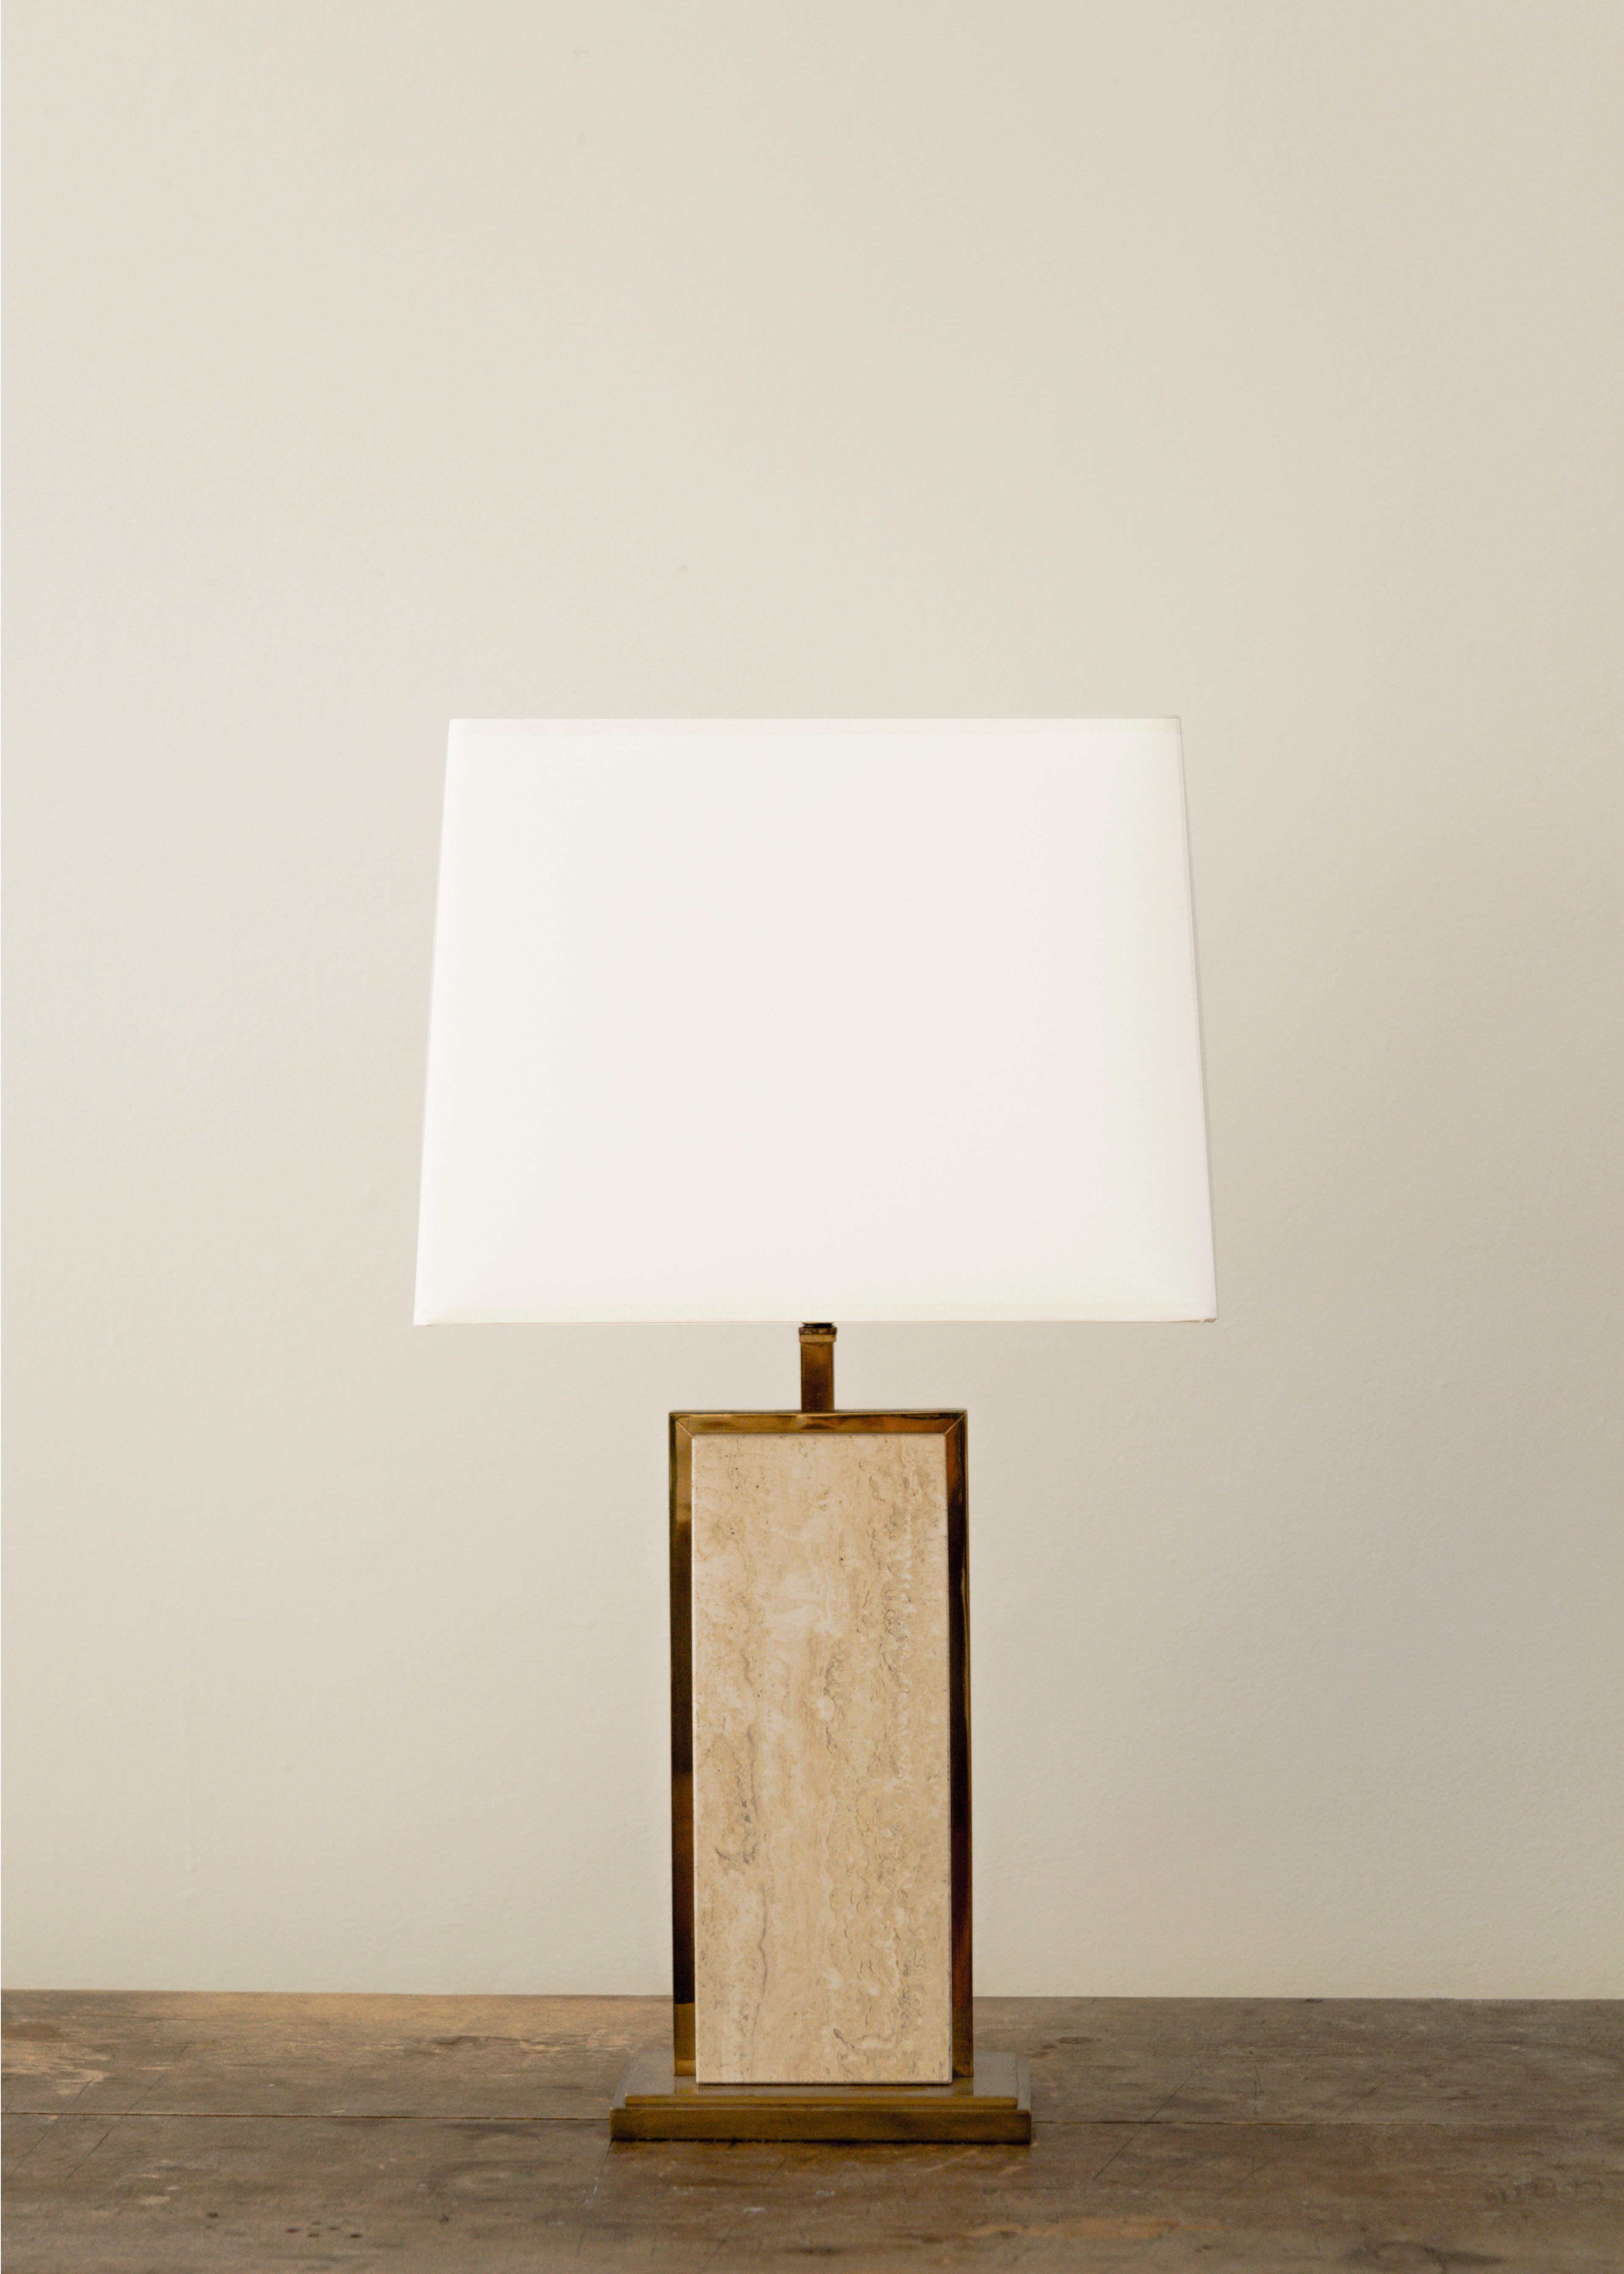 Table lamp with travertine block + antique brass mount base, new wiring and shade, France, circa 1960's.